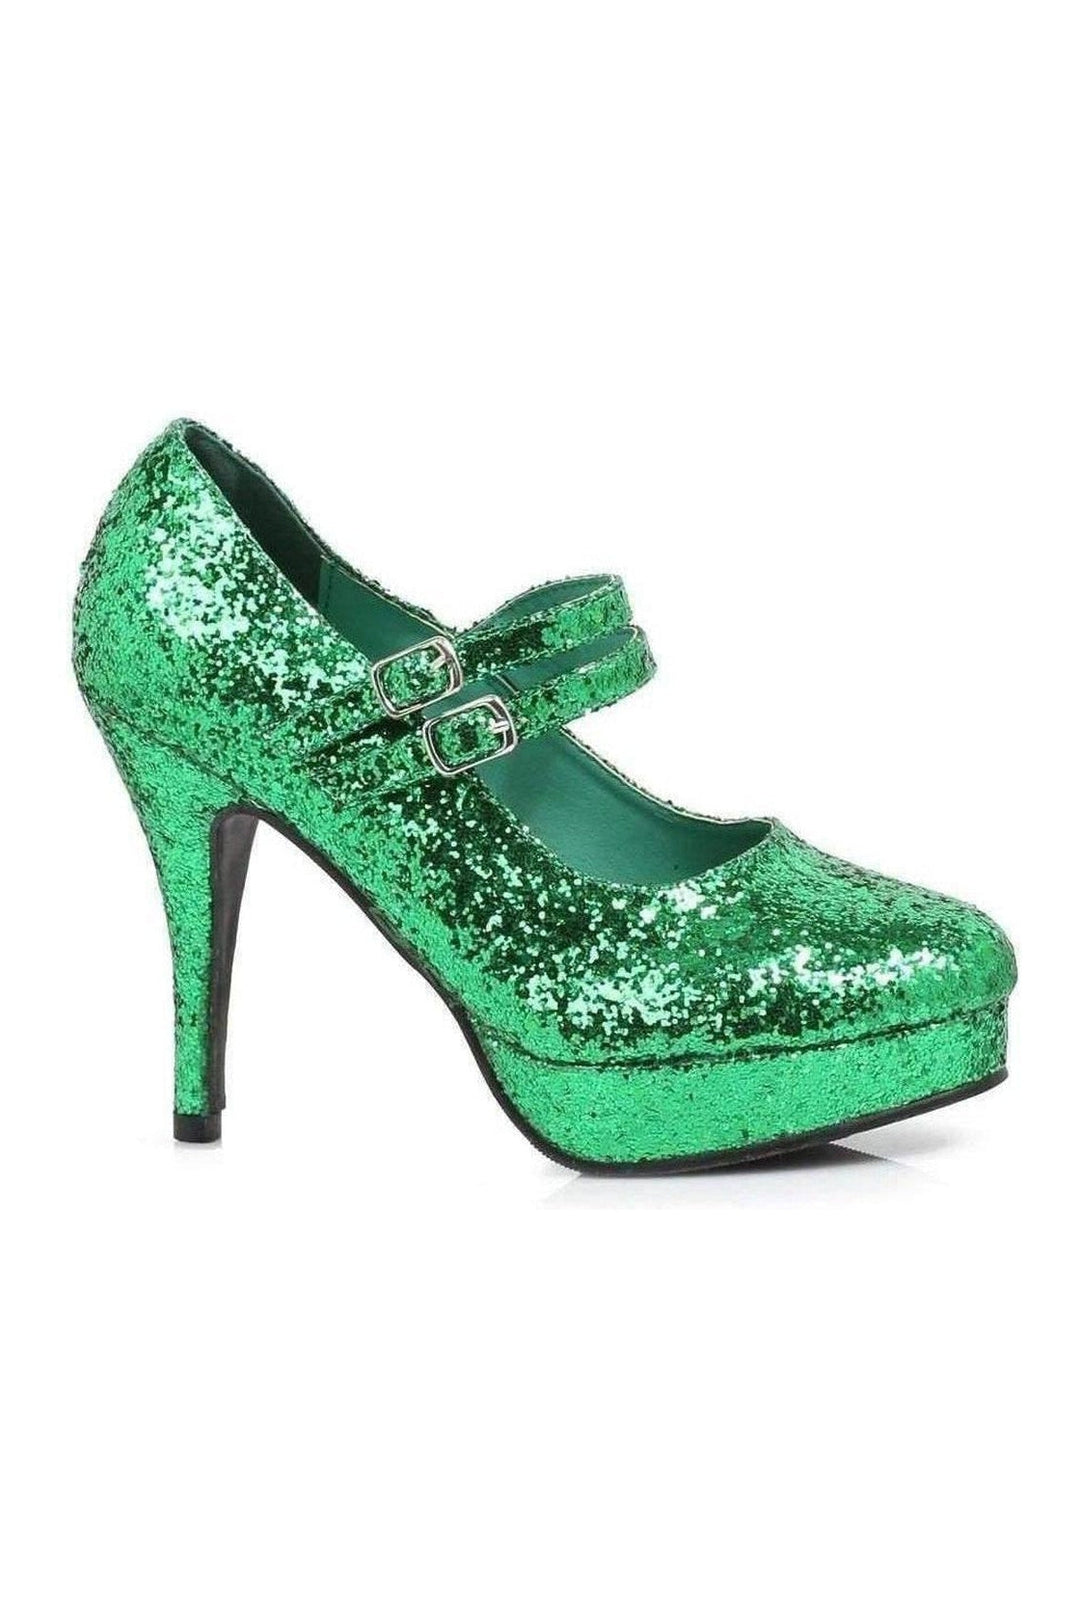 421-JANE-G Mary Jane | Green Glitter-Ellie Shoes-Green-Mary Janes-SEXYSHOES.COM